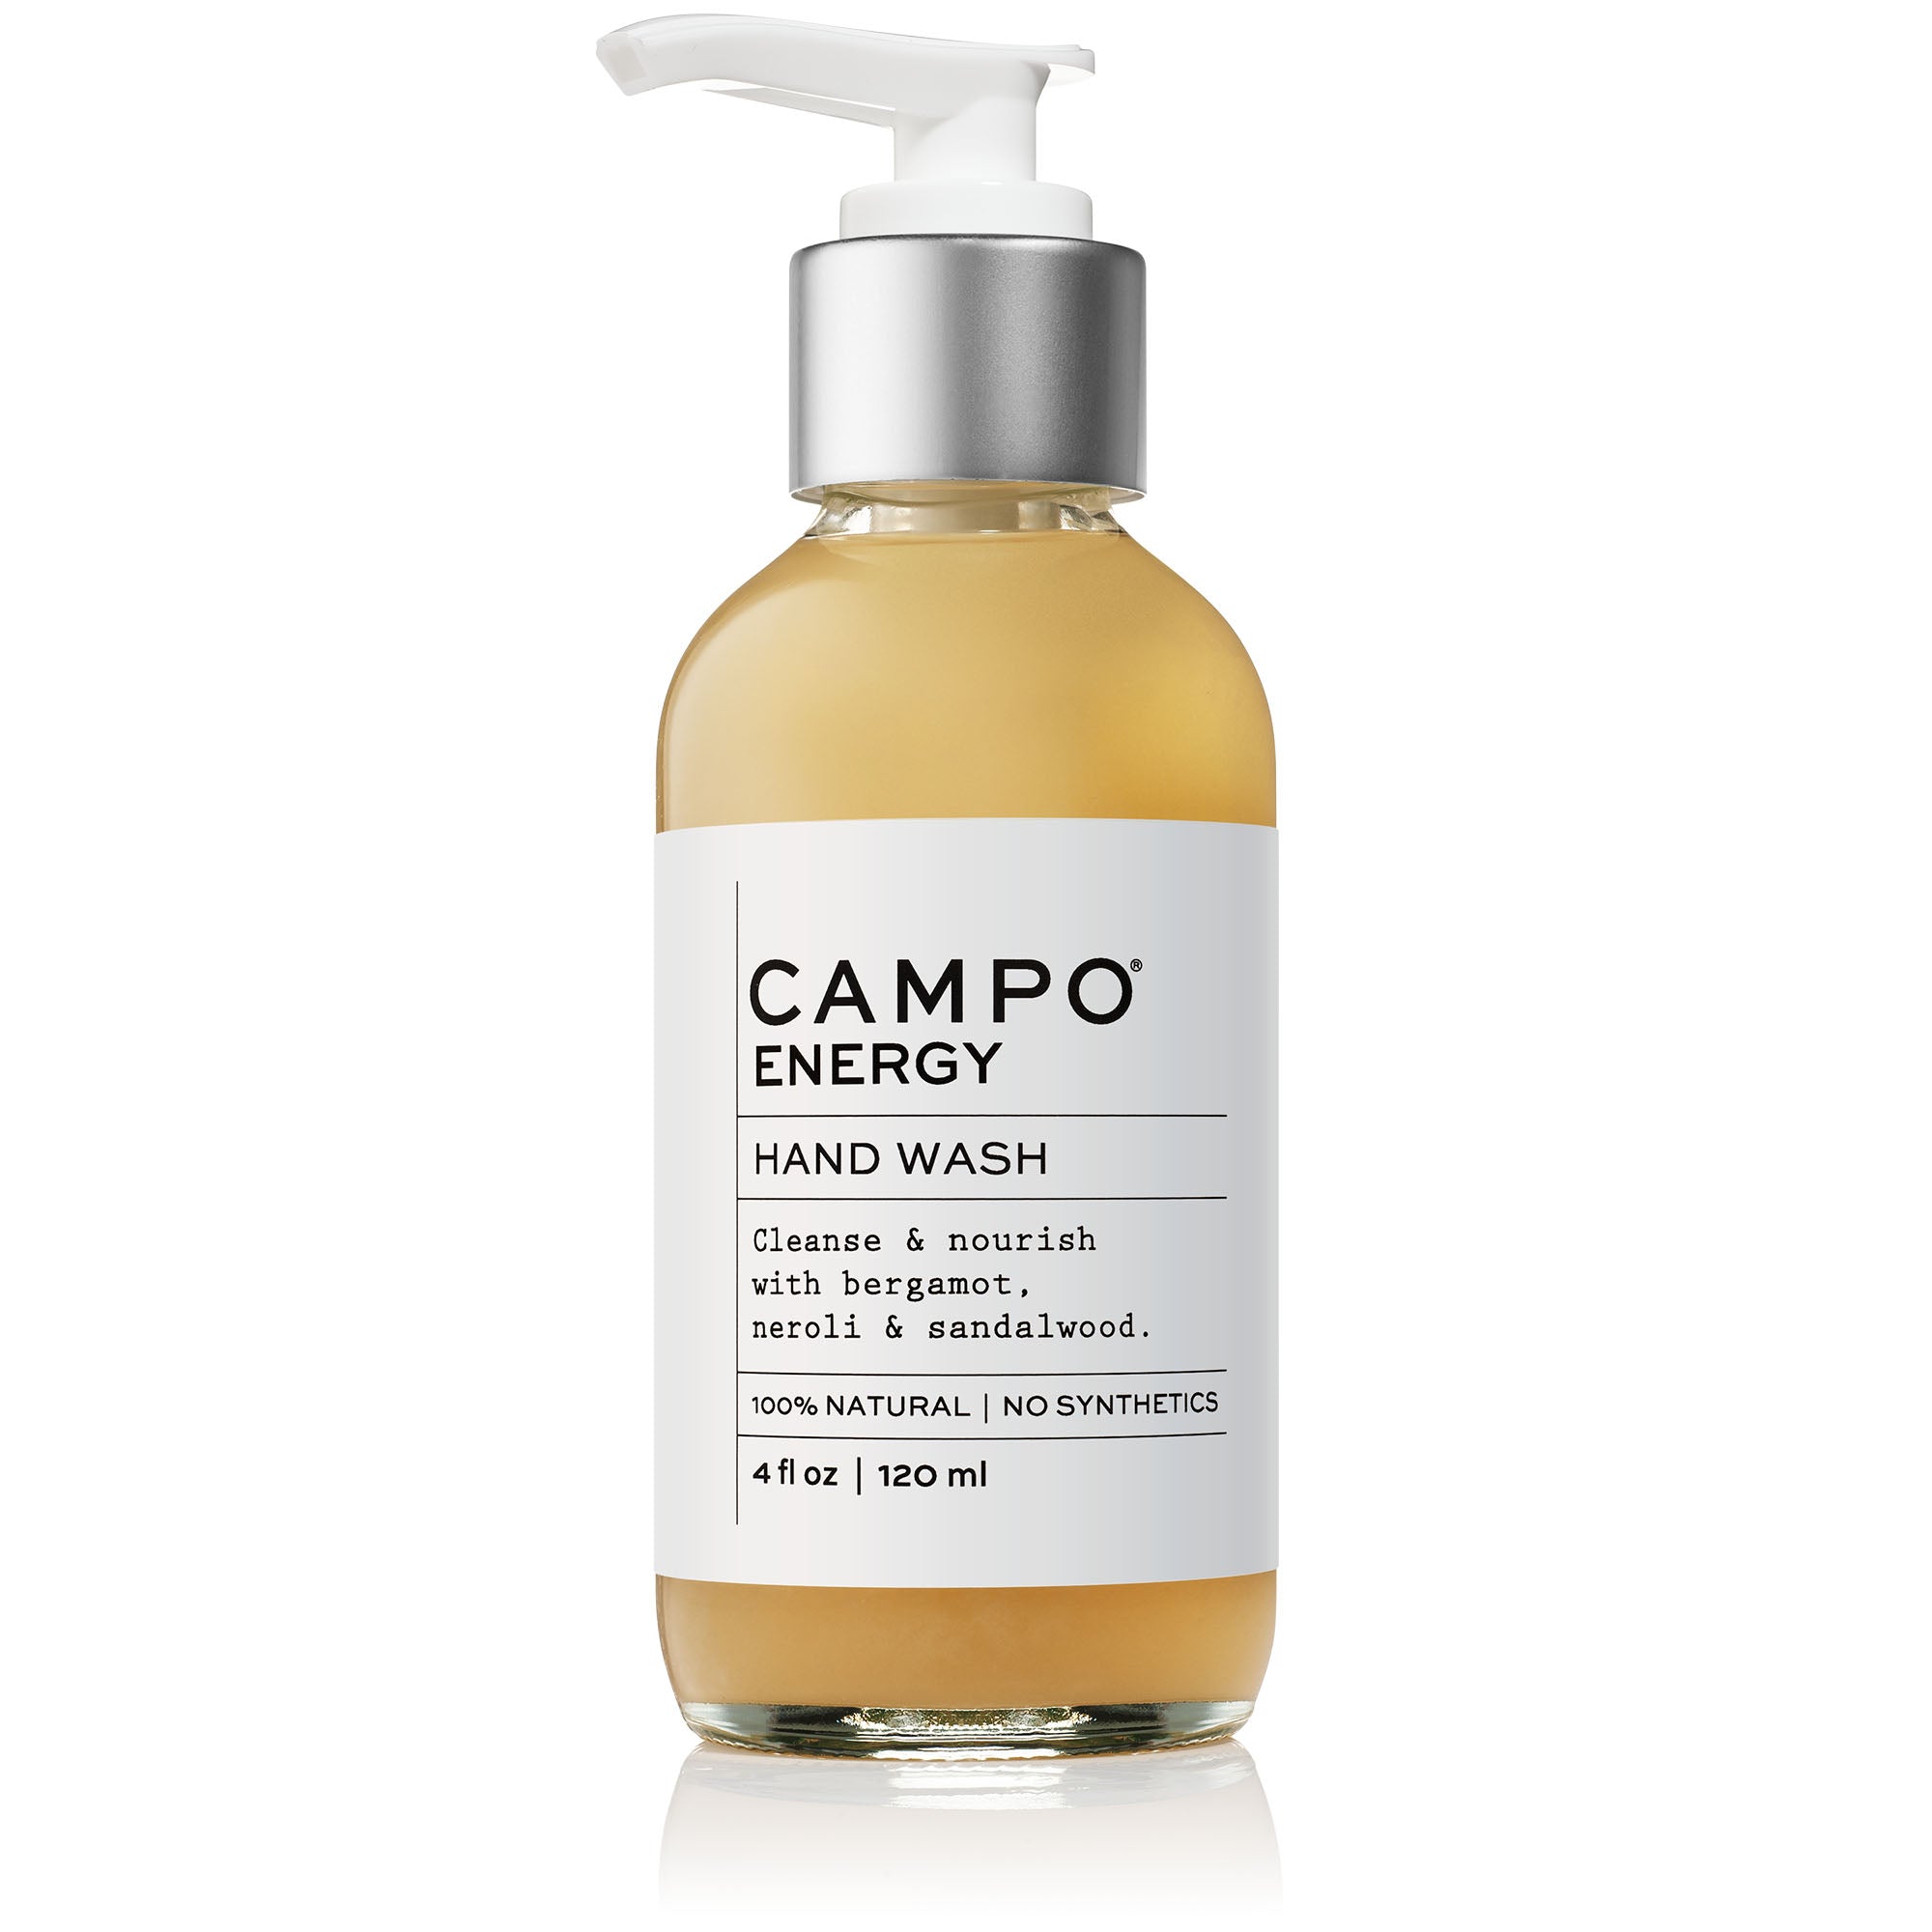 Campo Beauty Essential Oil Hand Wash - ENERGY Blend. Wash away the germs & breathe in aromatherapy with our nourishing ENERGY essential oil hand wash. Stay well with a 100% natural essential oil blend of bergamot, neroli & sandalwood. Transport yourself to nature & transform your mood.  No harsh, dirty ingredients - no synthetic preservatives, detergents, or foaming agents.